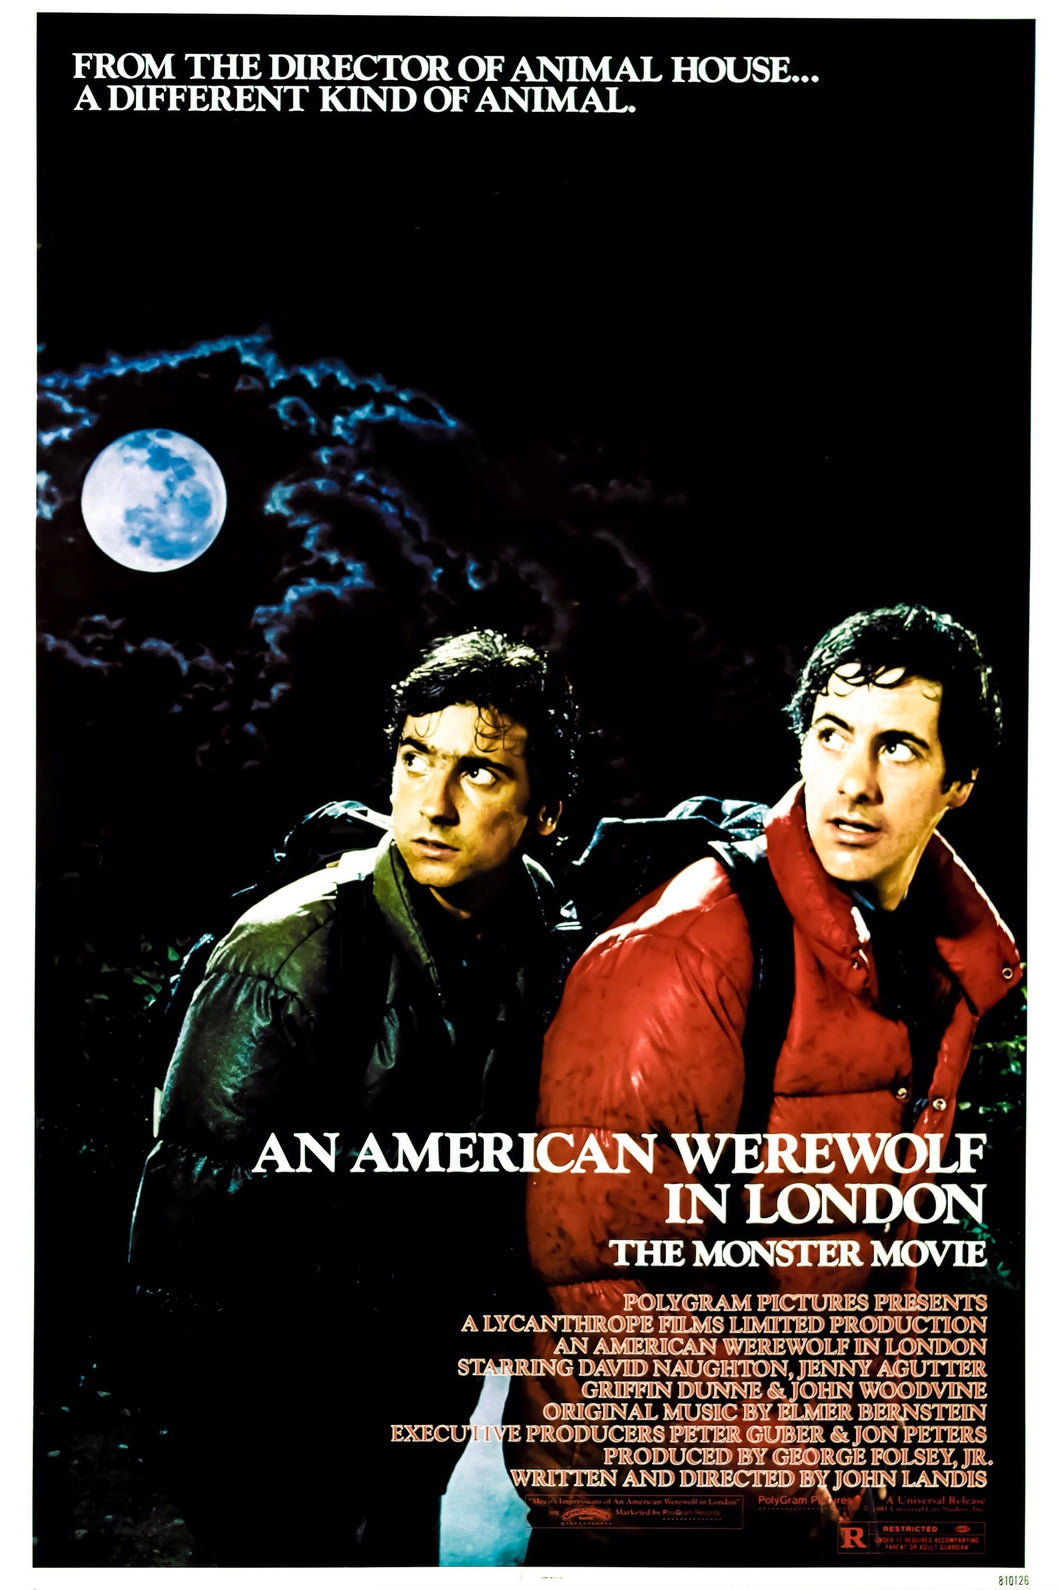 An American Werewolf in London (1981)v5 Movie Poster High Quality Glossy Paper A1 A2 A3 A4 A3 Framed or Unframed!!!